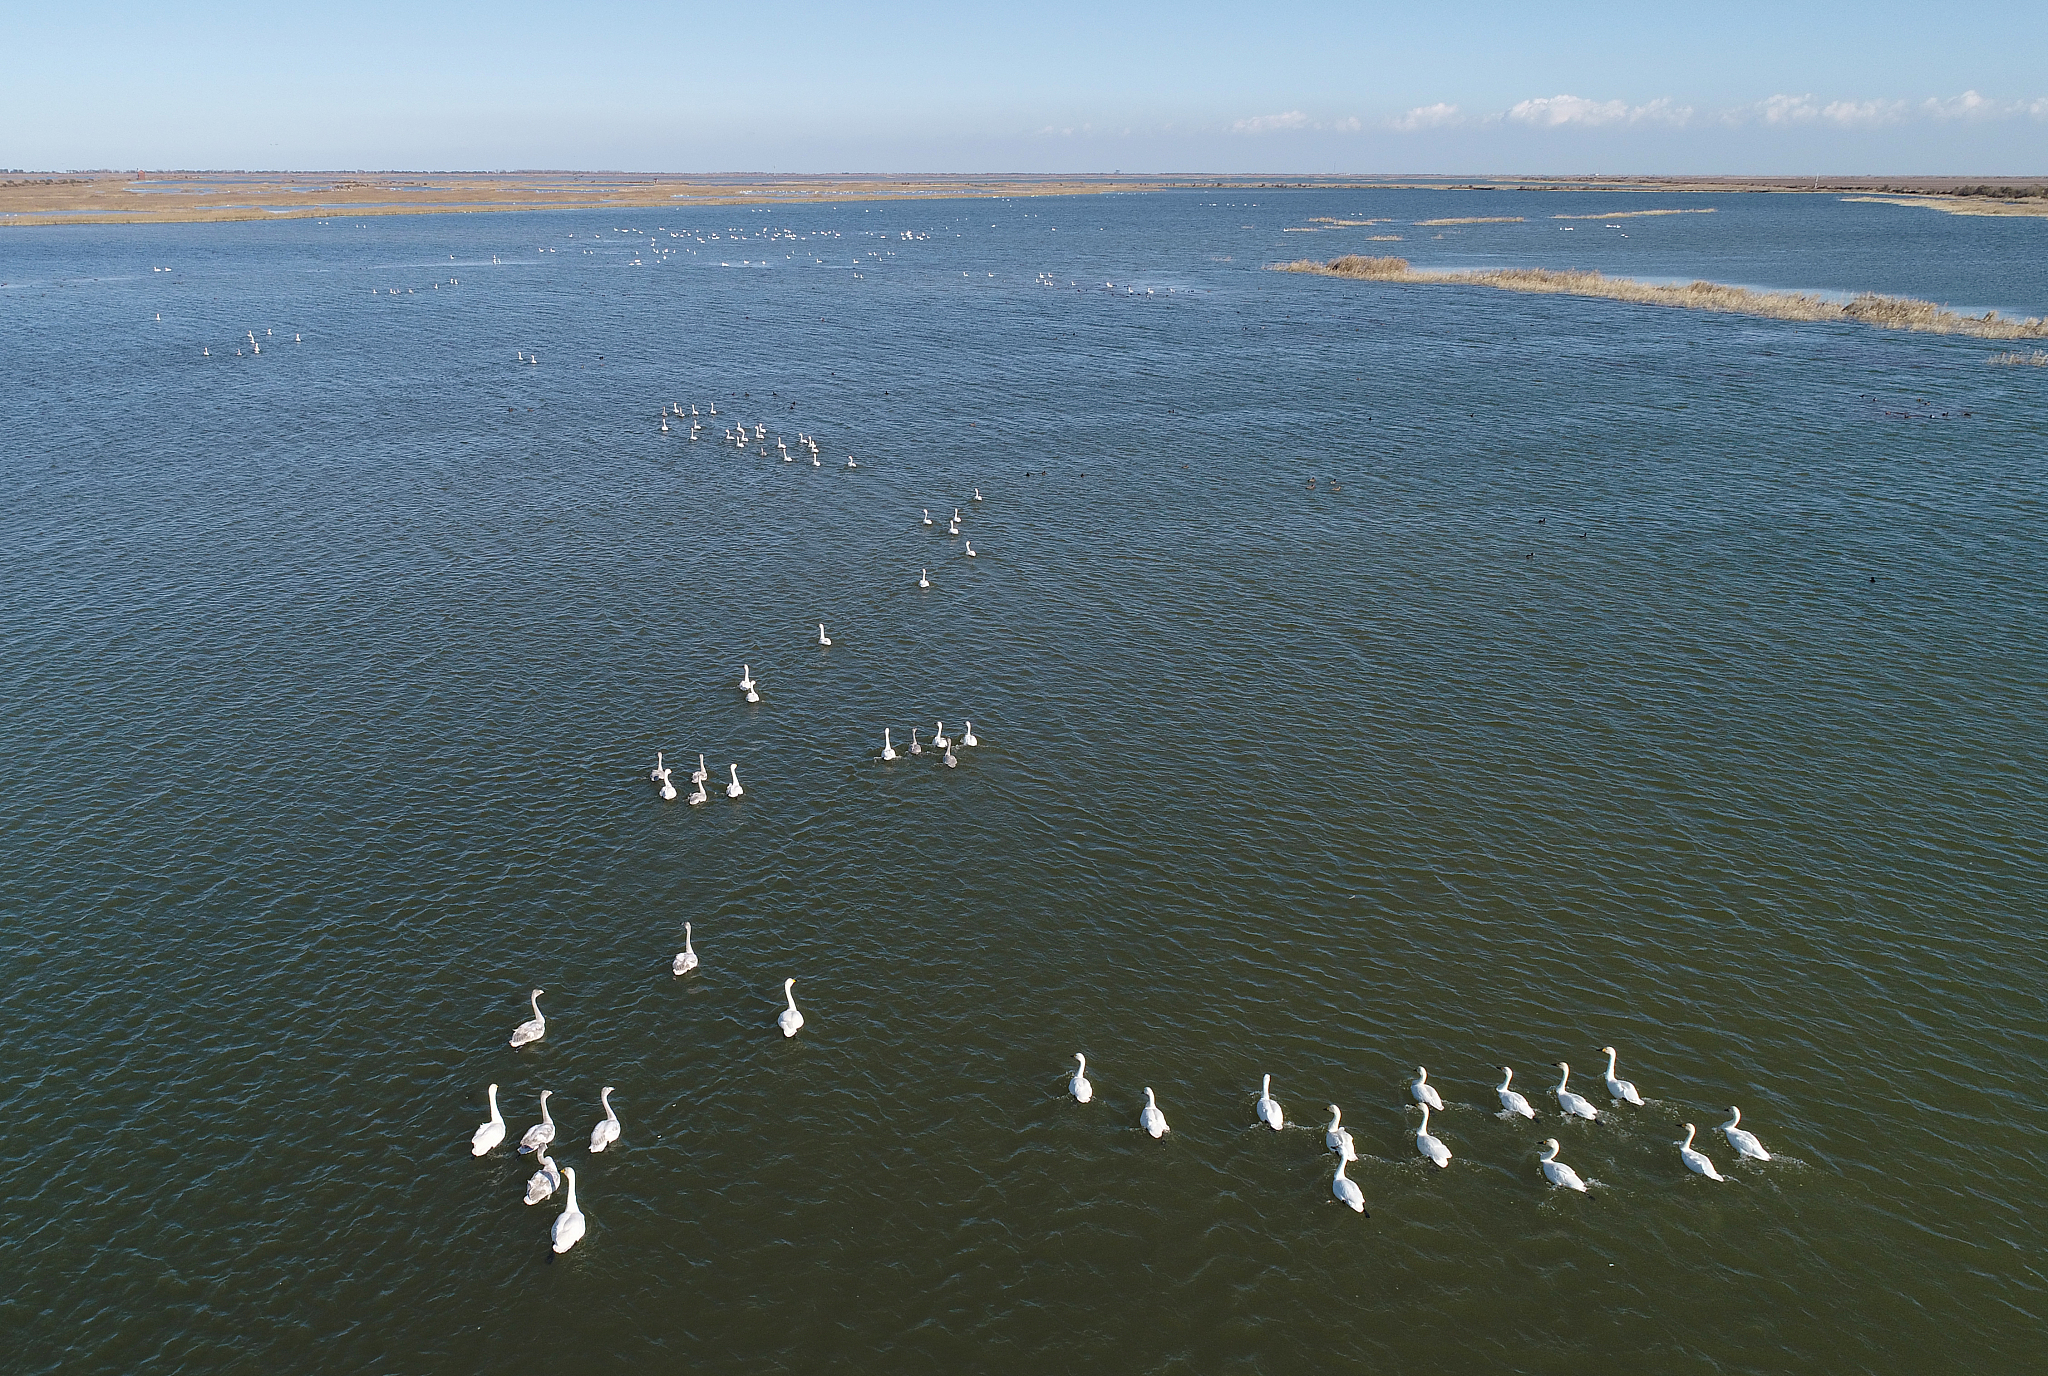 A file photo shows migratory birds in the sanctuary at the mouth of the Yellow River in Dongying, Shandong Province. /CFP